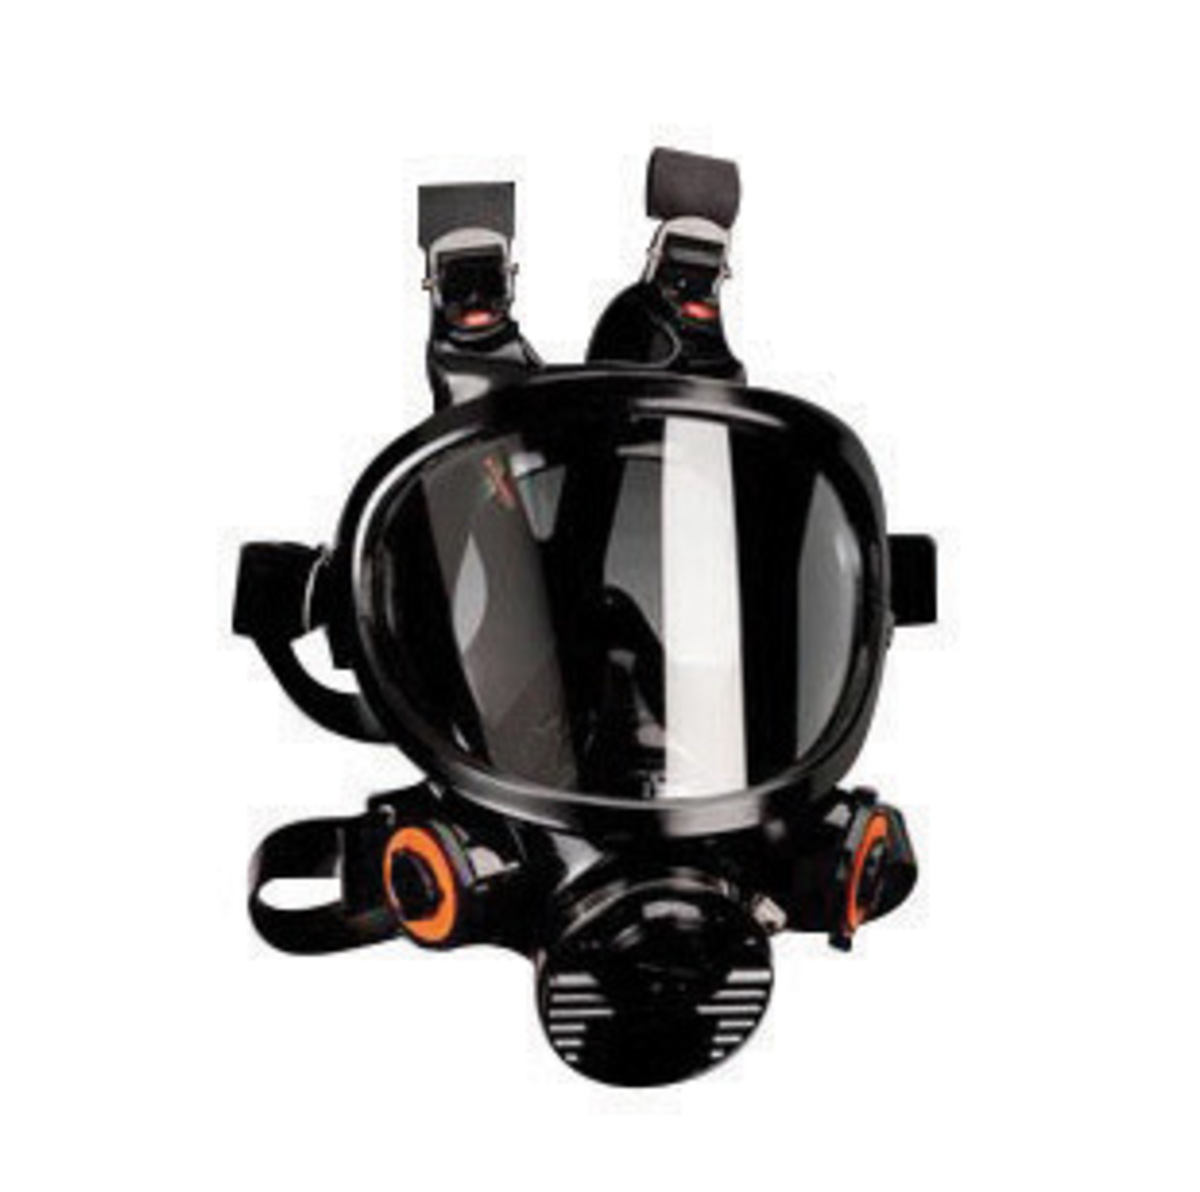 3M™ Medium 7000 Series Full Face Air Purifying Respirator (Availability restrictions apply.)